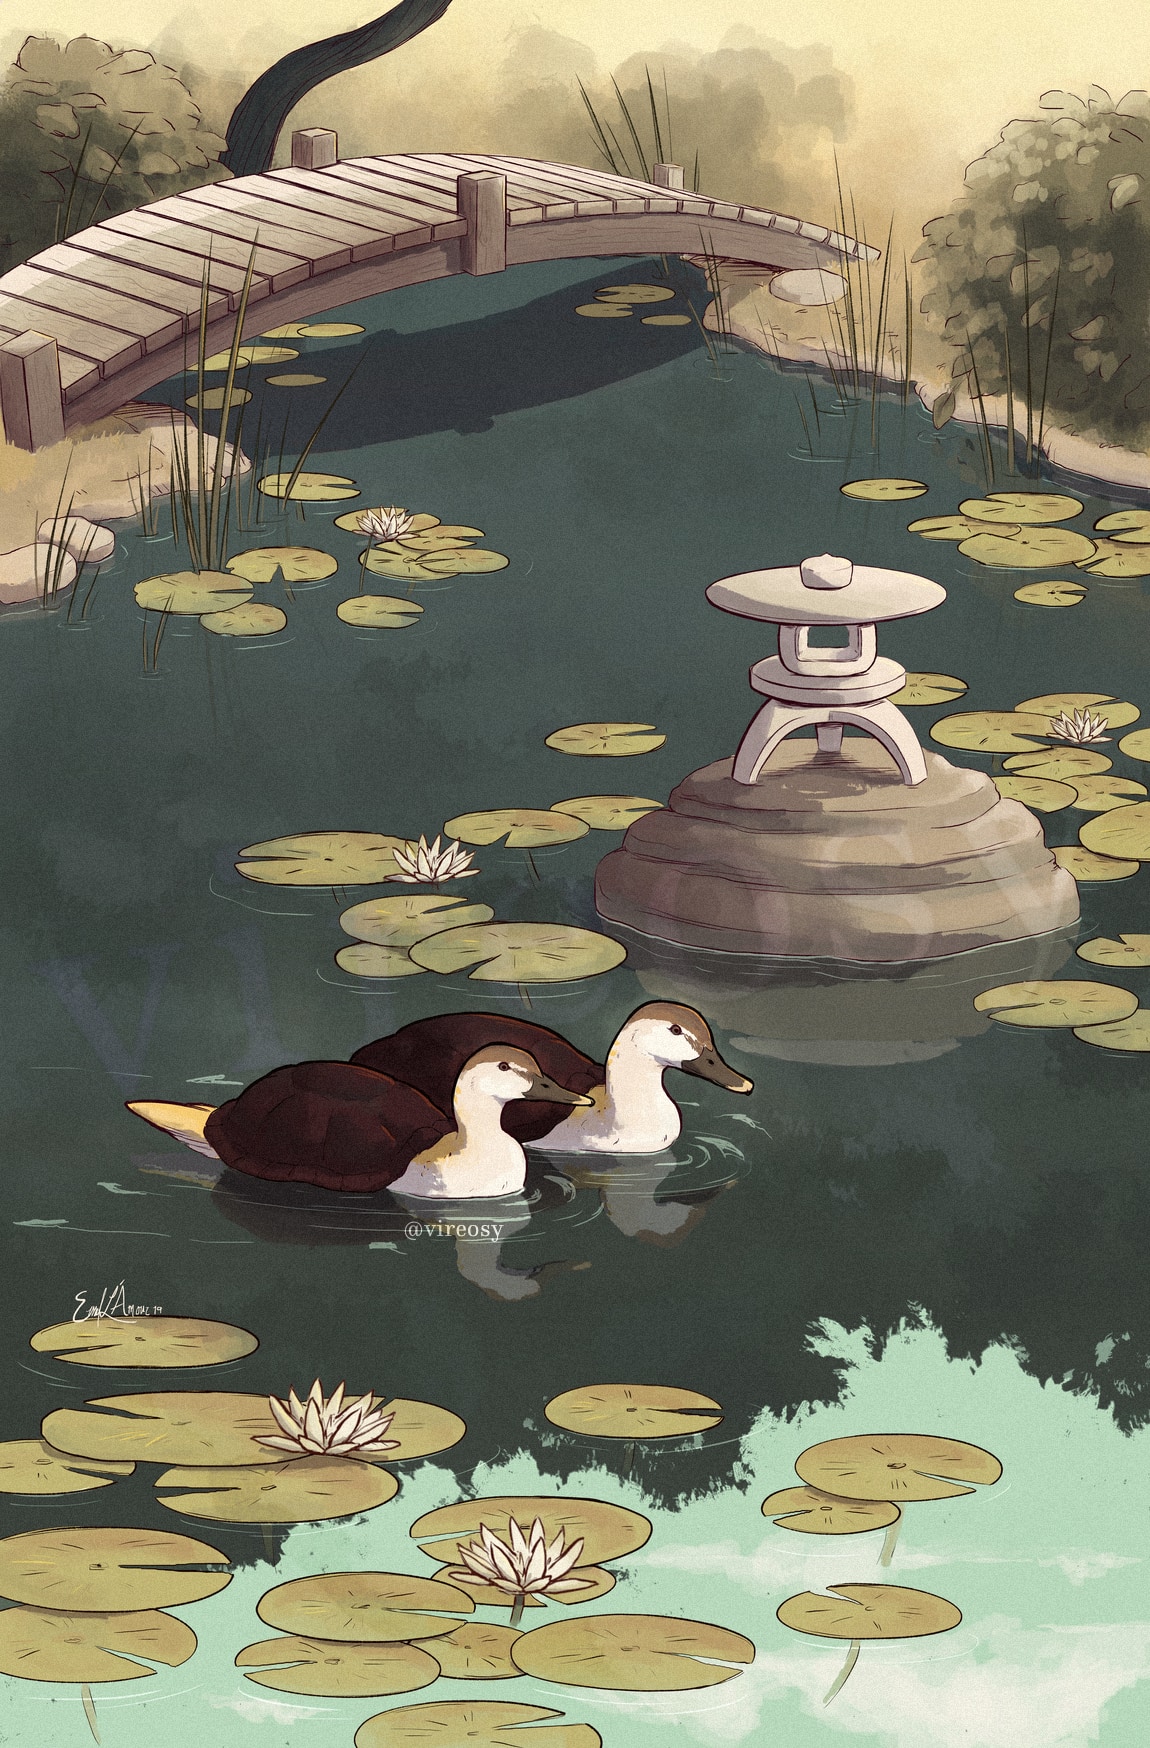 Illustration of a garden pond from Avatar: The Last Airbender featuring a pair of swimming turtleduck.